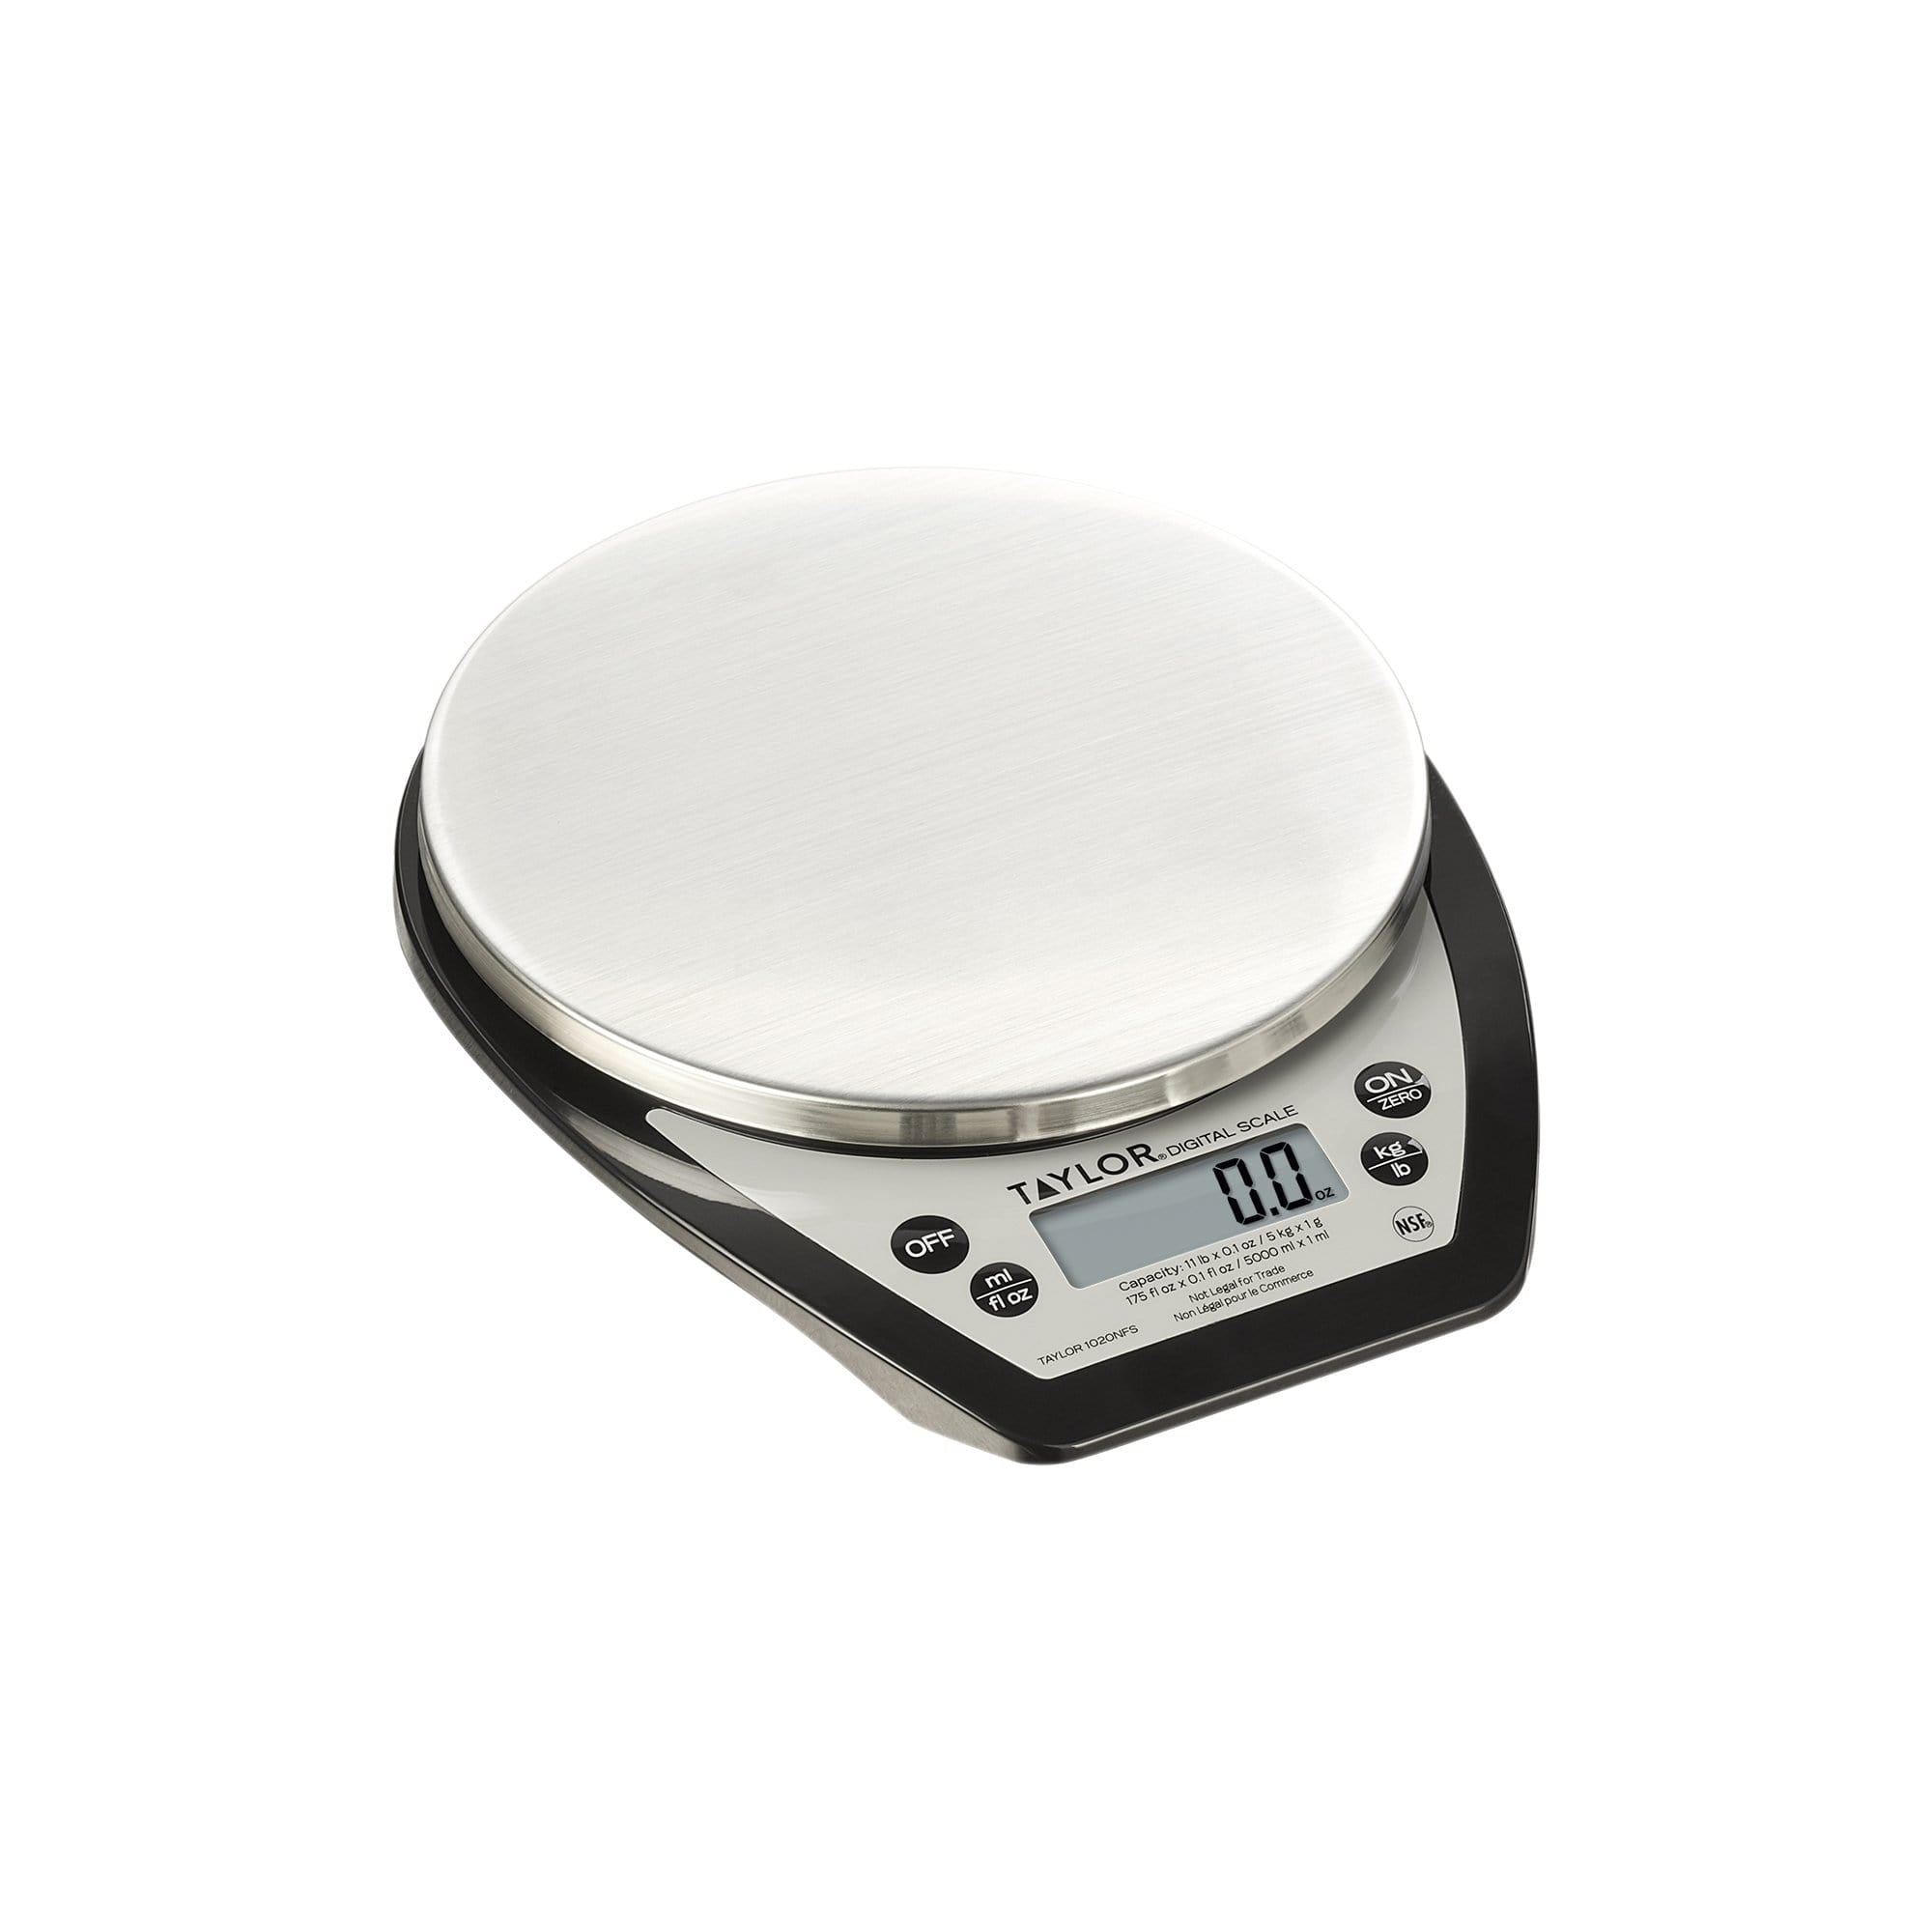 Precision Digital Food Scale Weight Grams and Oz, LB, KG, ML